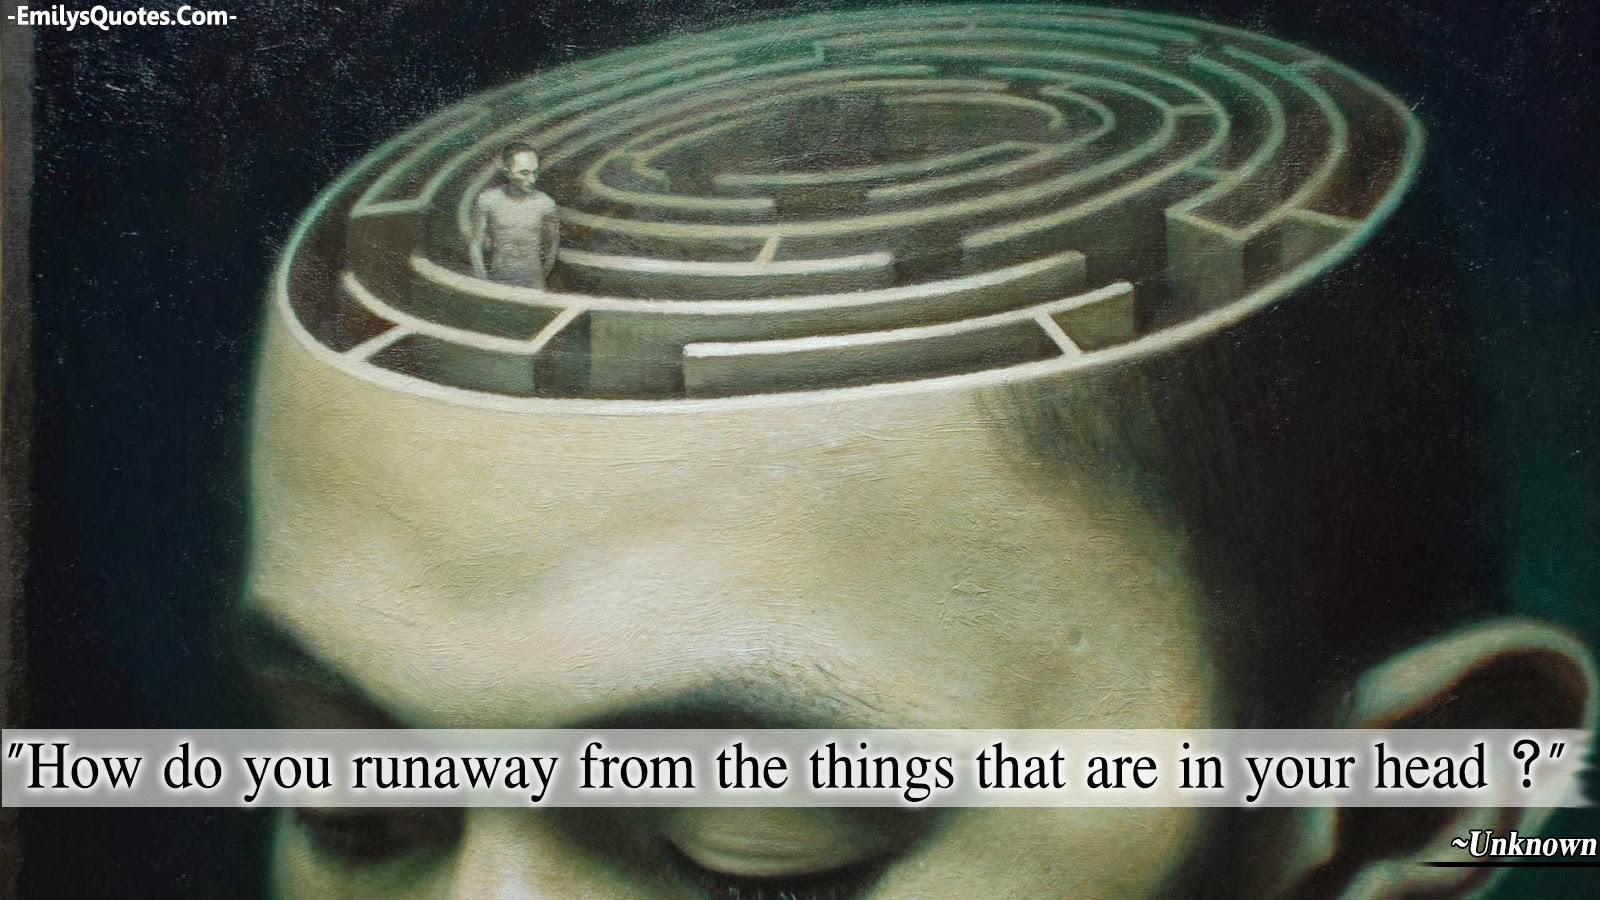 How do you run away from the things that are in your head